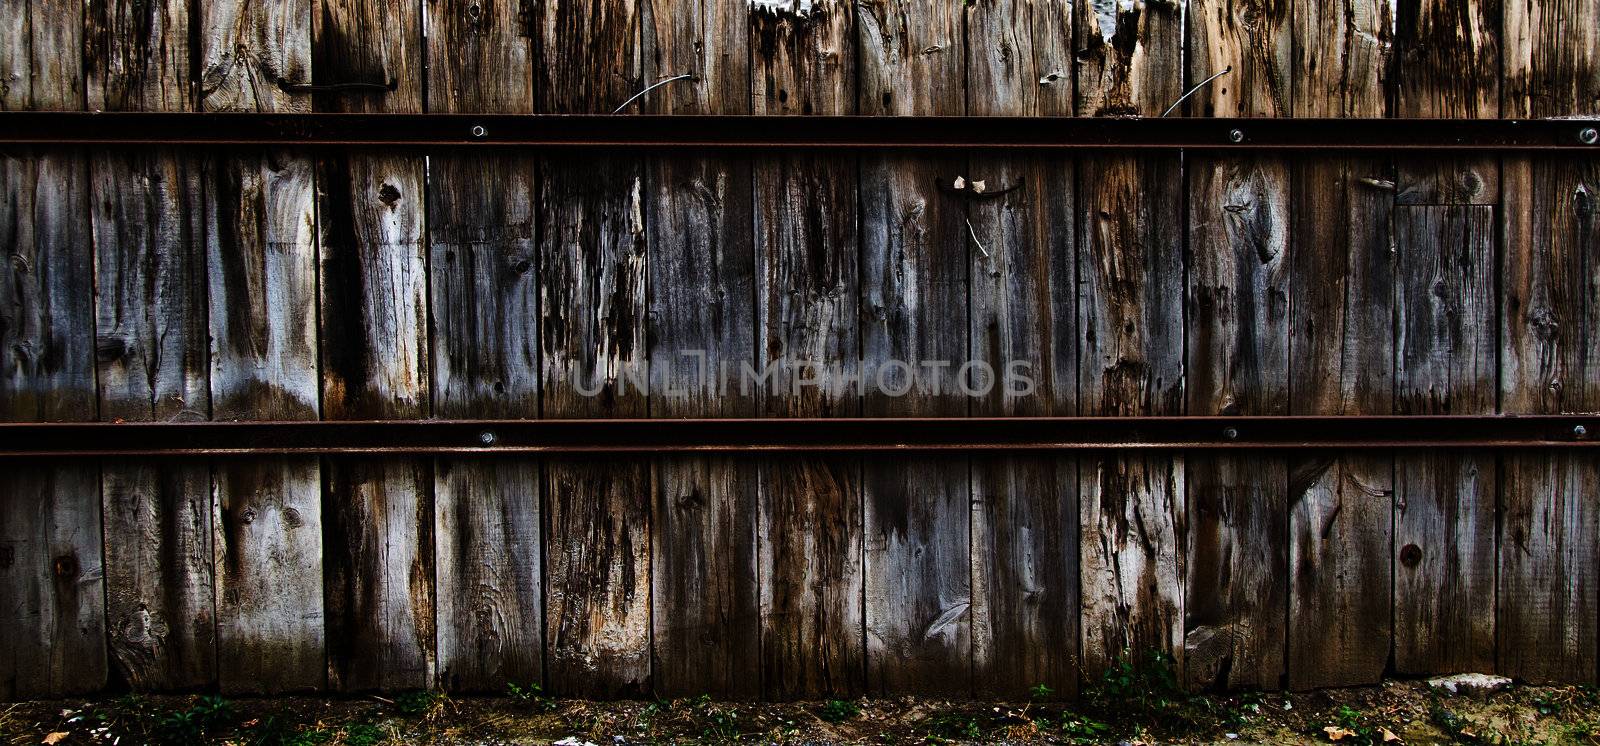 This is an old wood fence in old Montreal with rusty metal. Very contrasty texture with a lot of details.